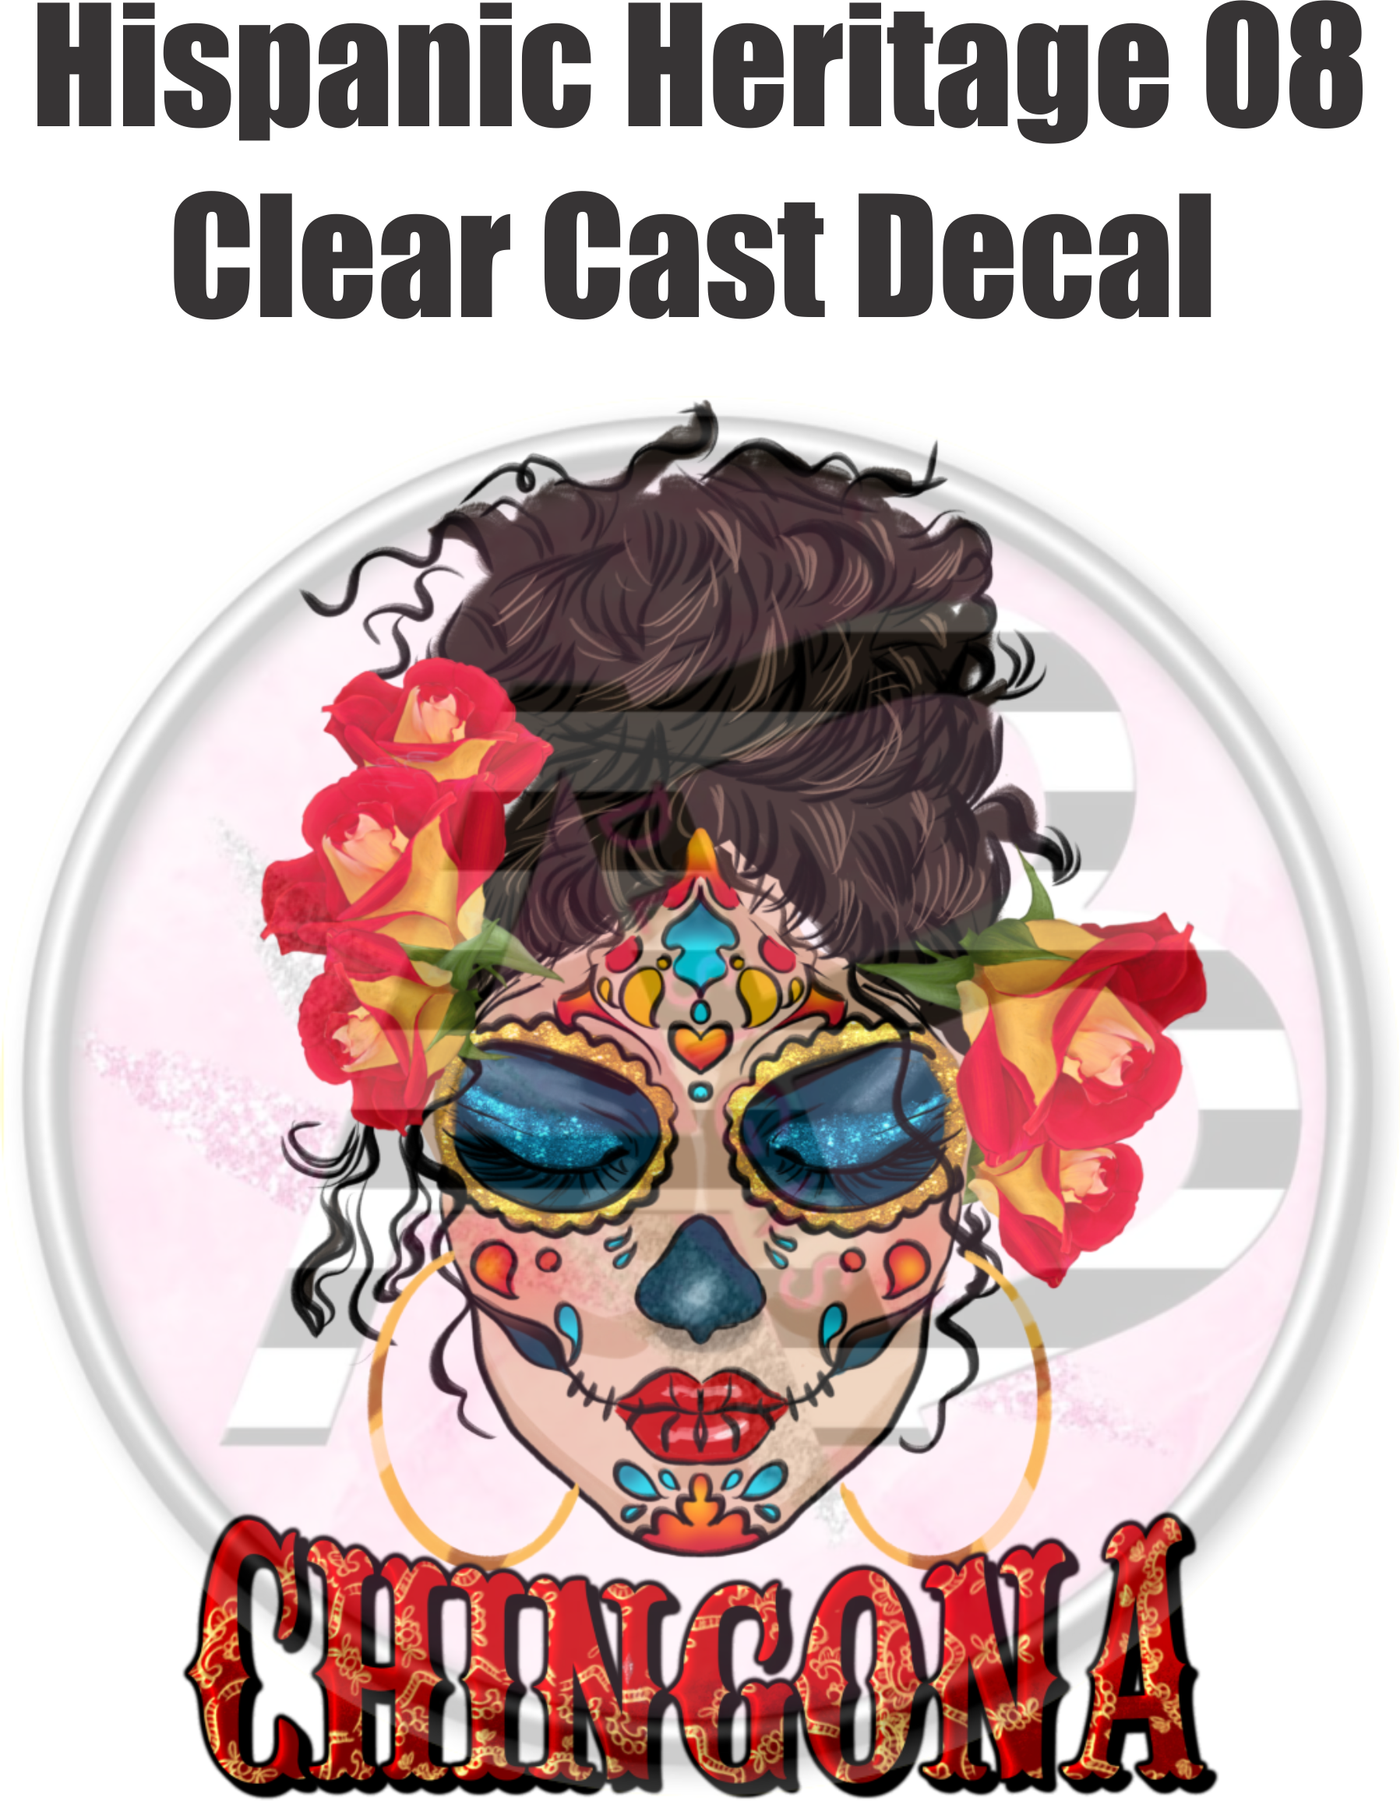 Hispanic Heritage 08 - Clear Cast Decal